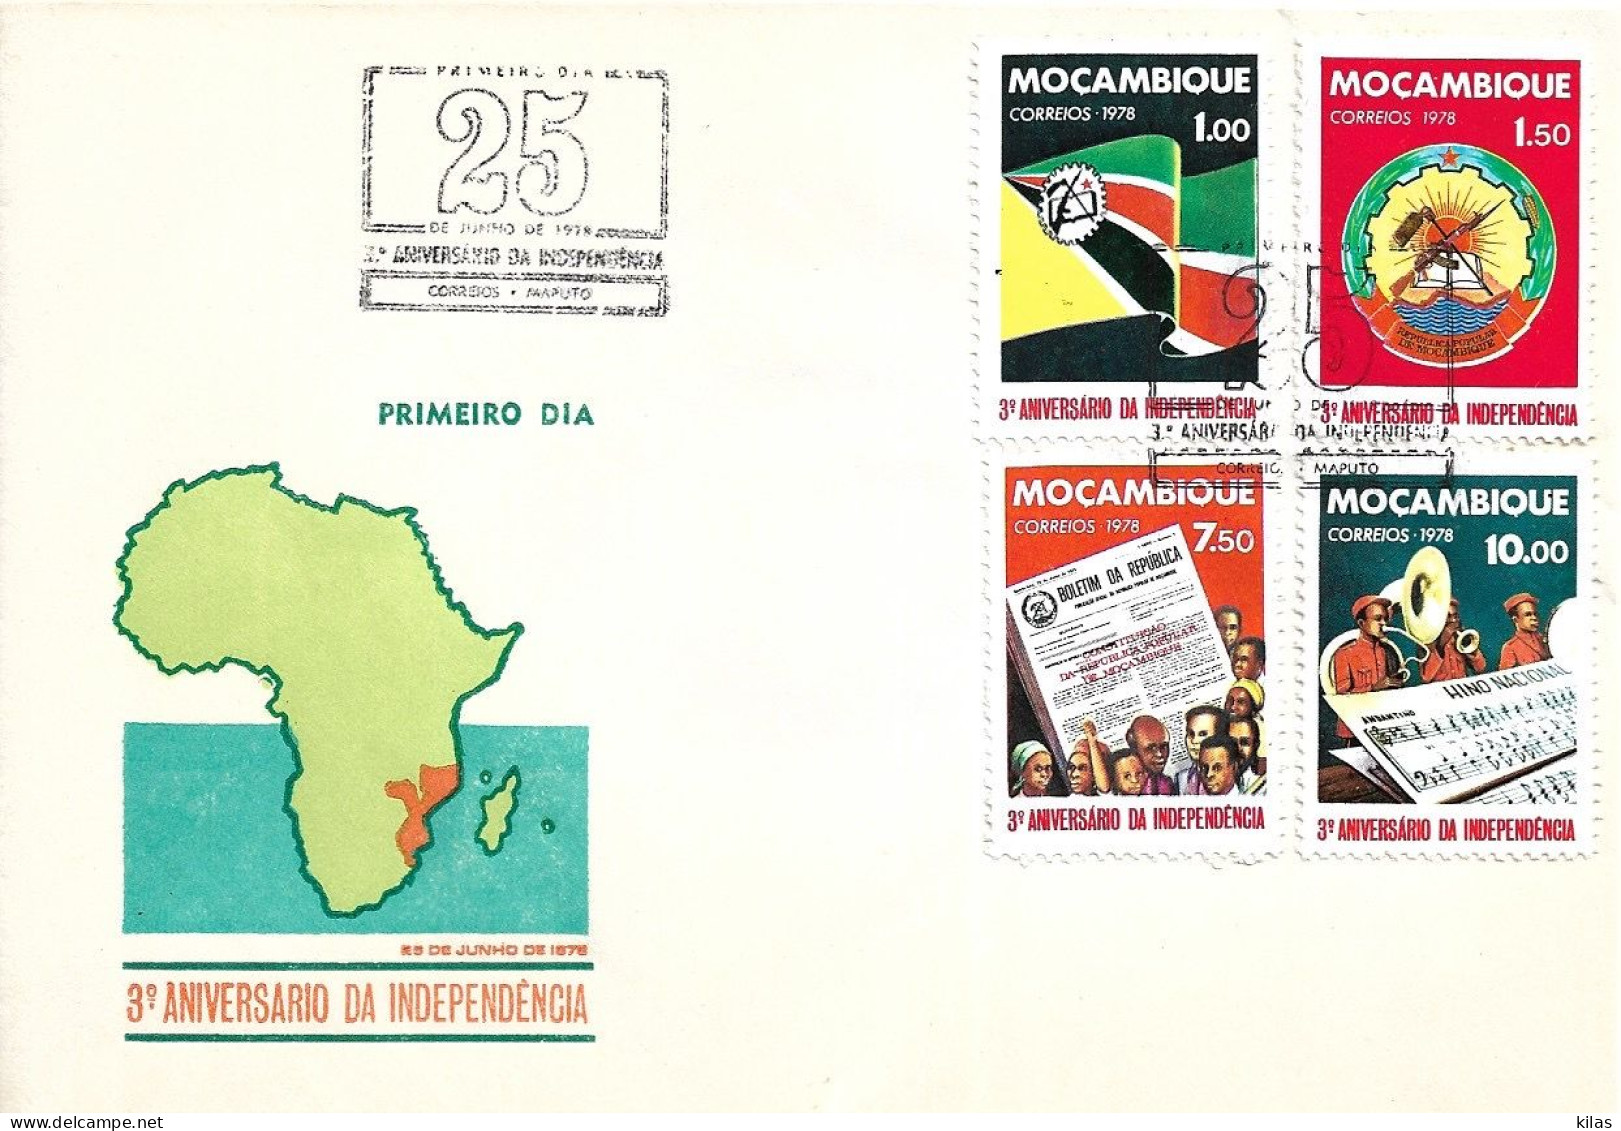 MOZAMBIQUE 1978 3rd ANNIVERSARY OF INDEPENDENCE FDC - Mozambique